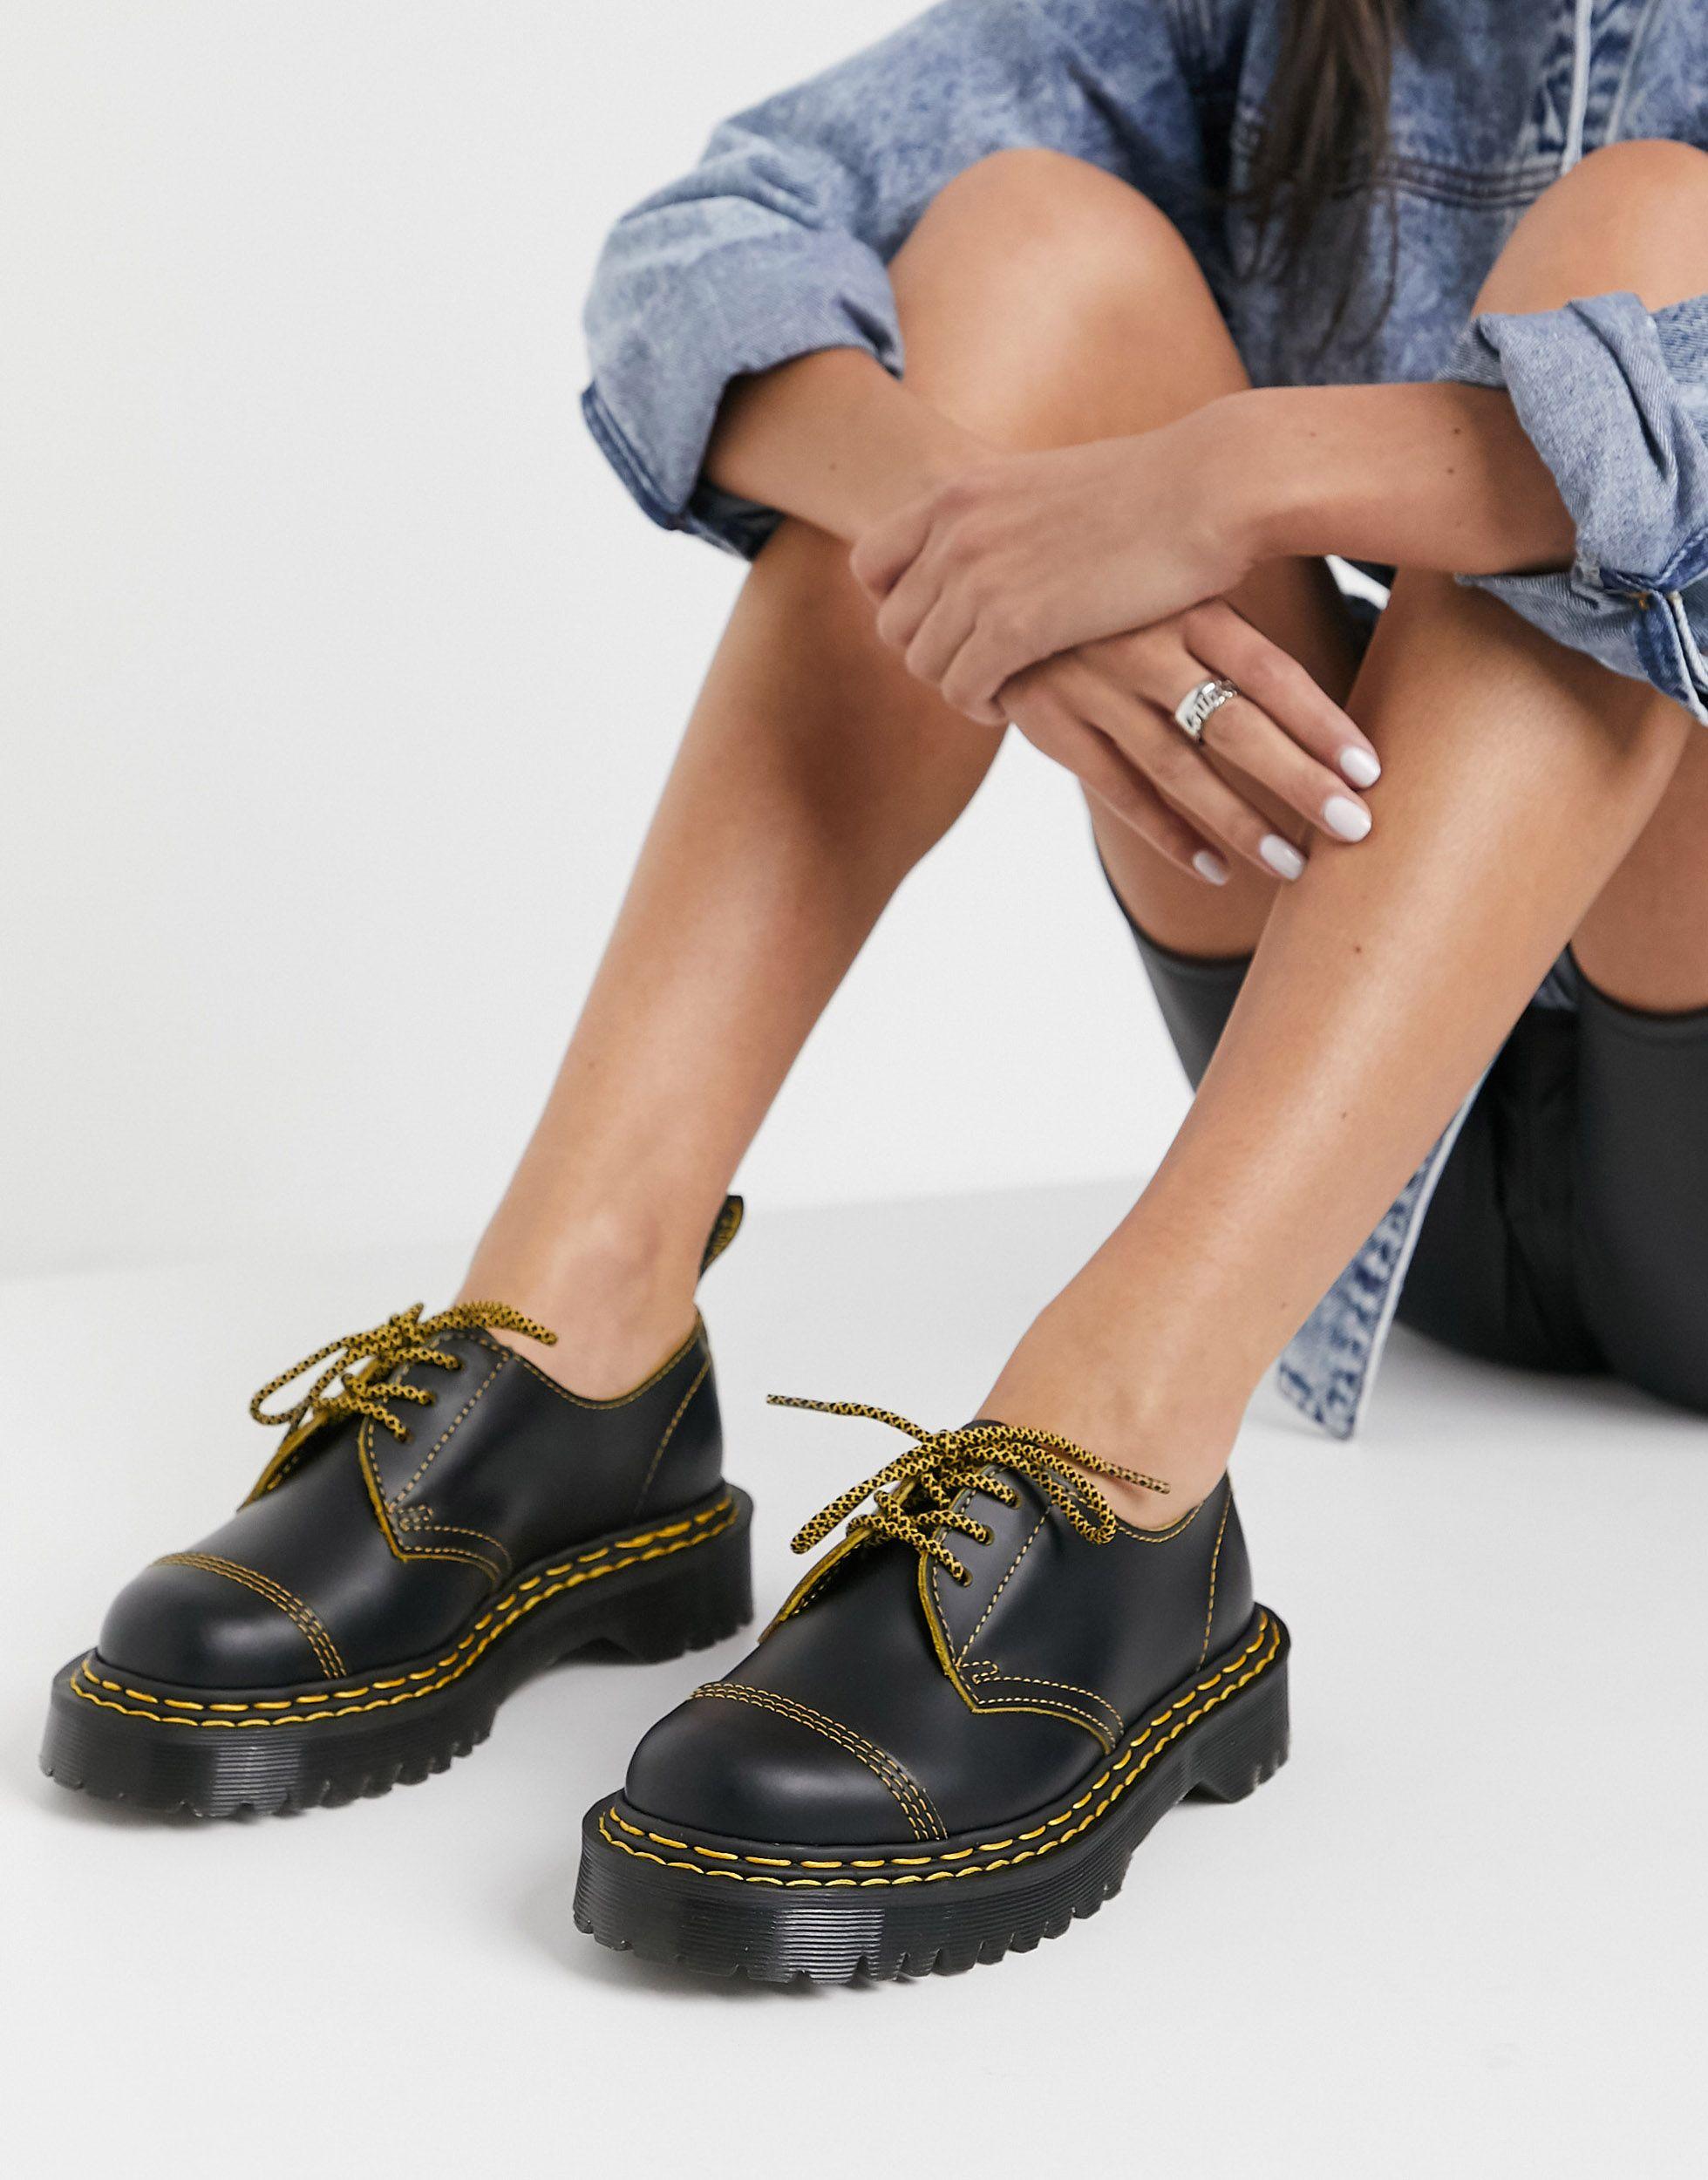 Dr. Martens 1461 Bex Double Stitch Shoes in Black | Lyst